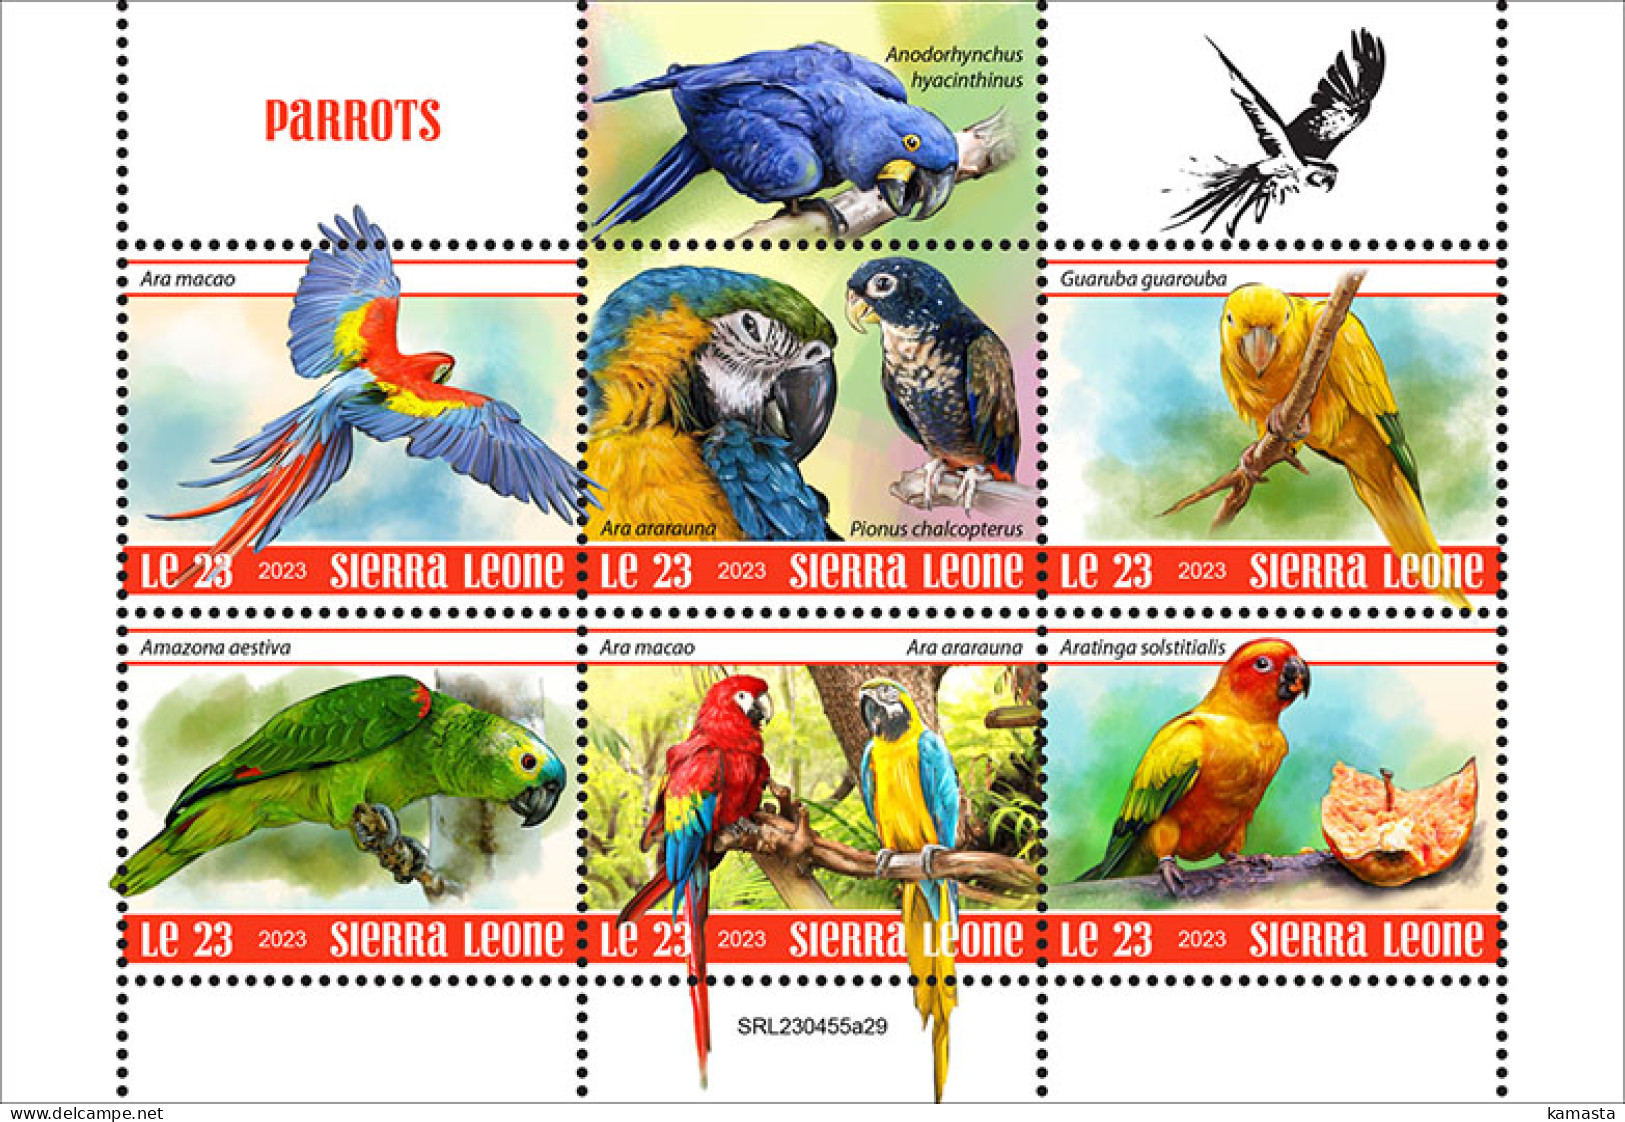 Sierra Leone  2023 Parrots. (445a29) OFFICIAL ISSUE - Papagayos